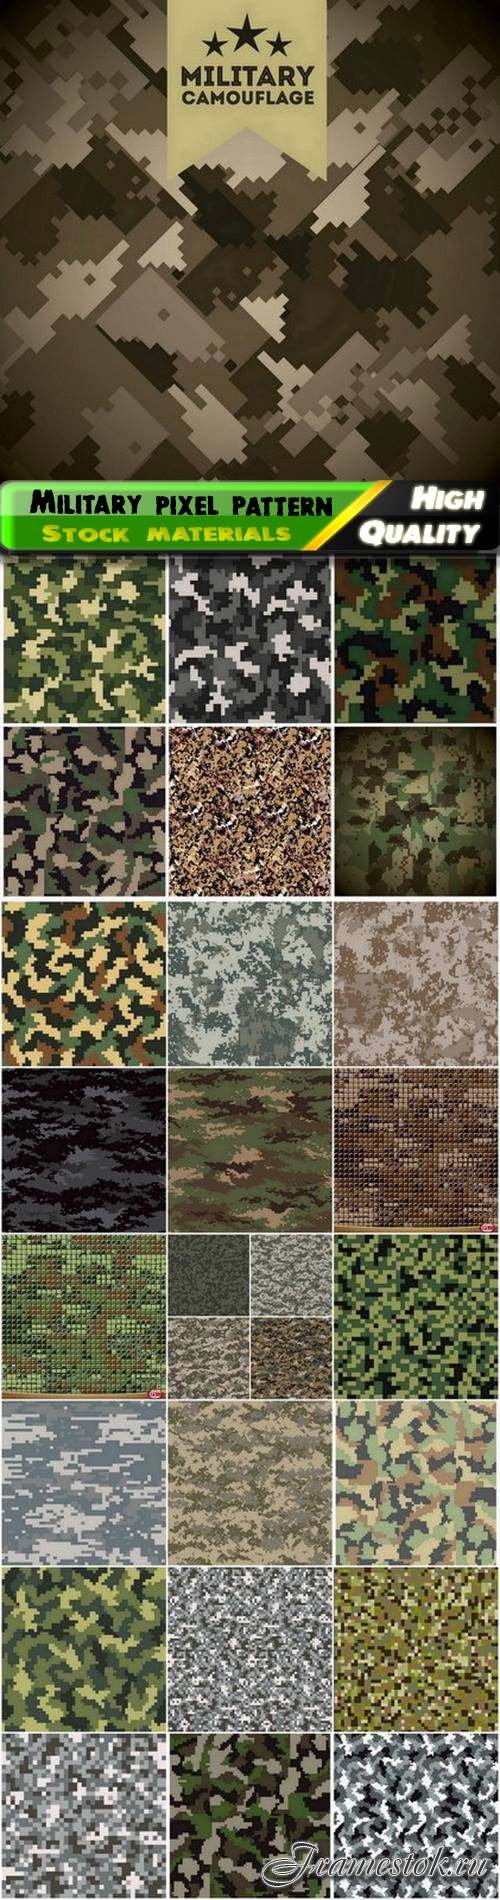 Abstract military pixel seamless pattern colors of camouflage - 25 Eps